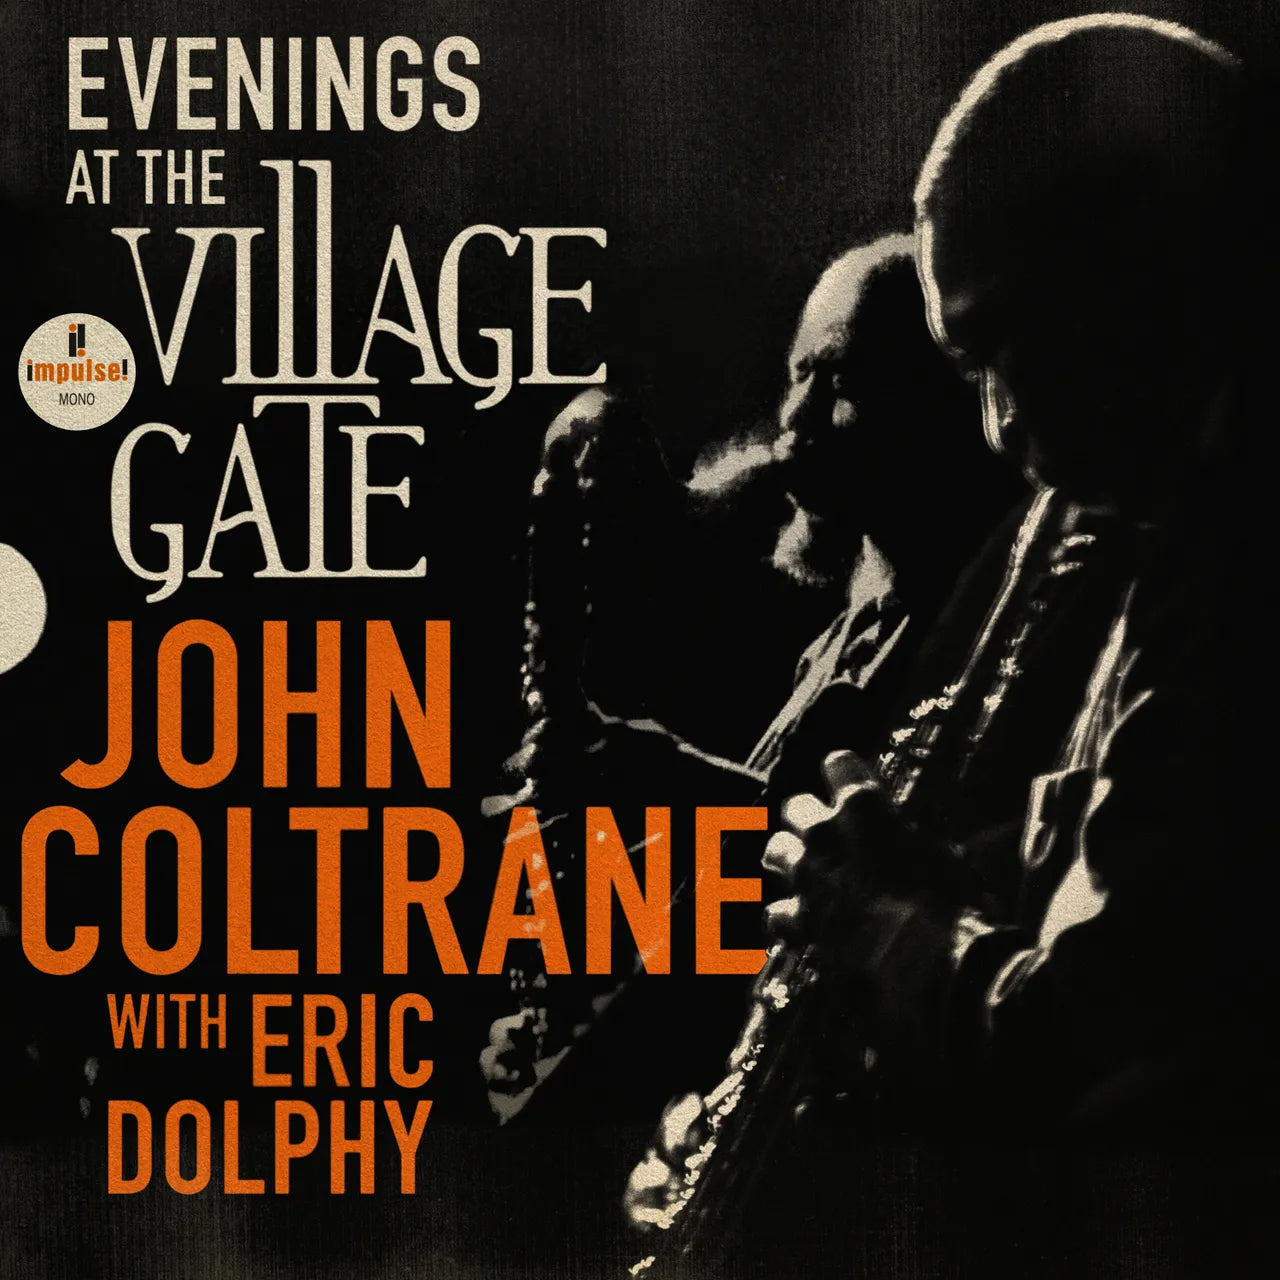 John Coltrane With Eric Dolphy ~ Evenings At The Village Gate